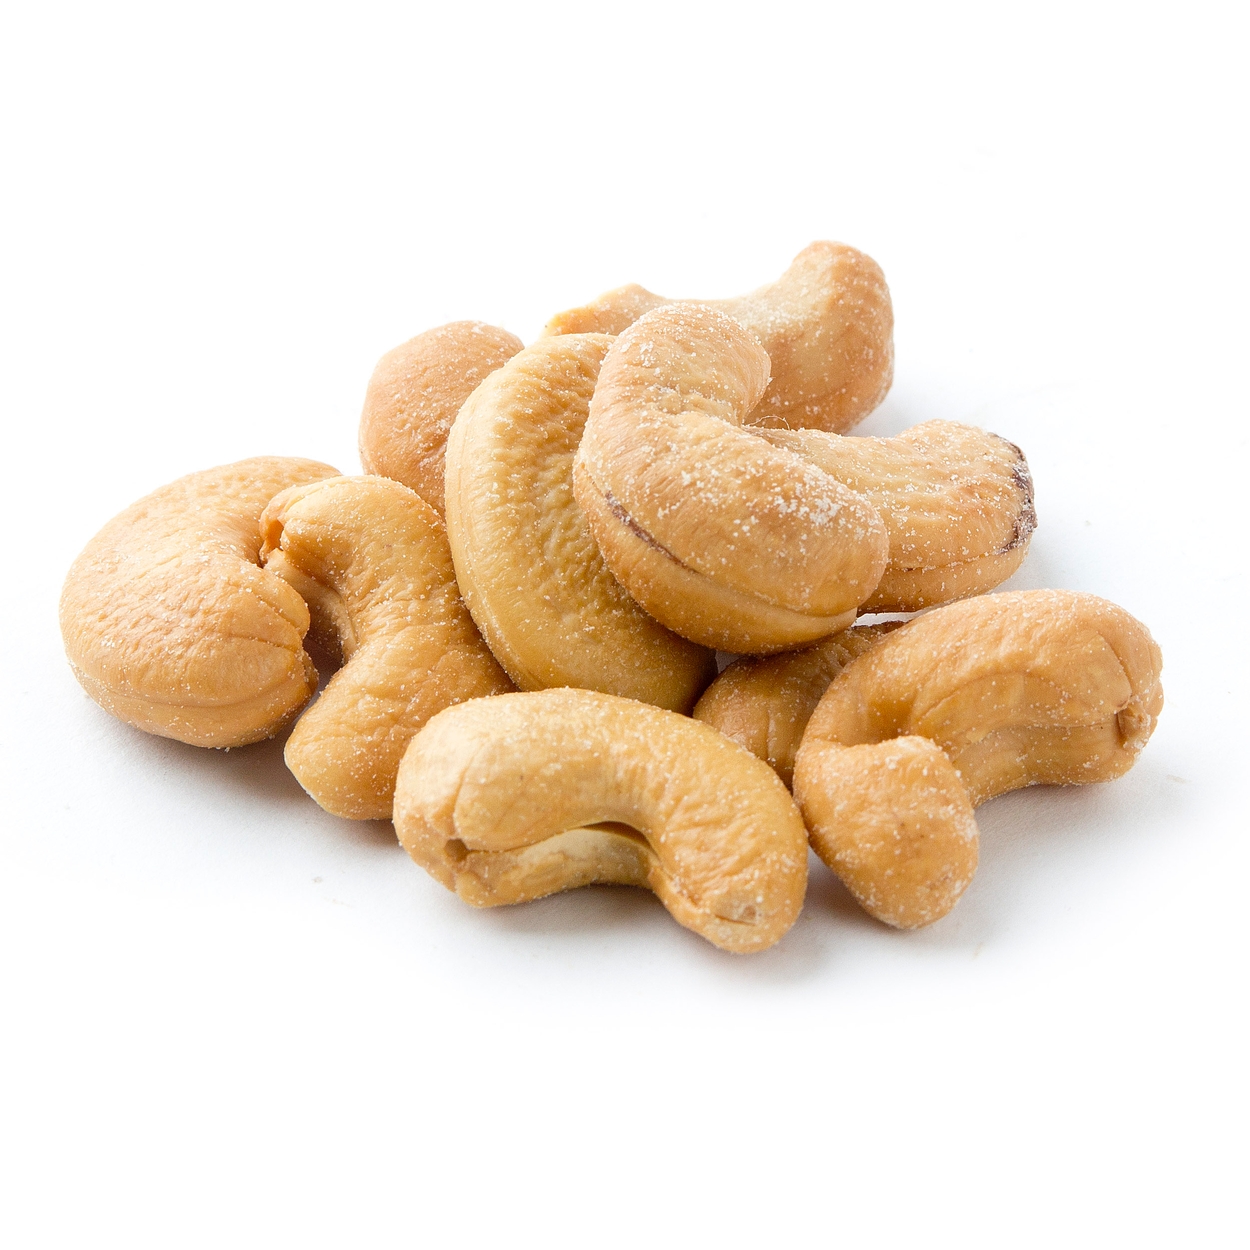 Cashew wallpapers, Food, HQ Cashew pictures | 4K ...